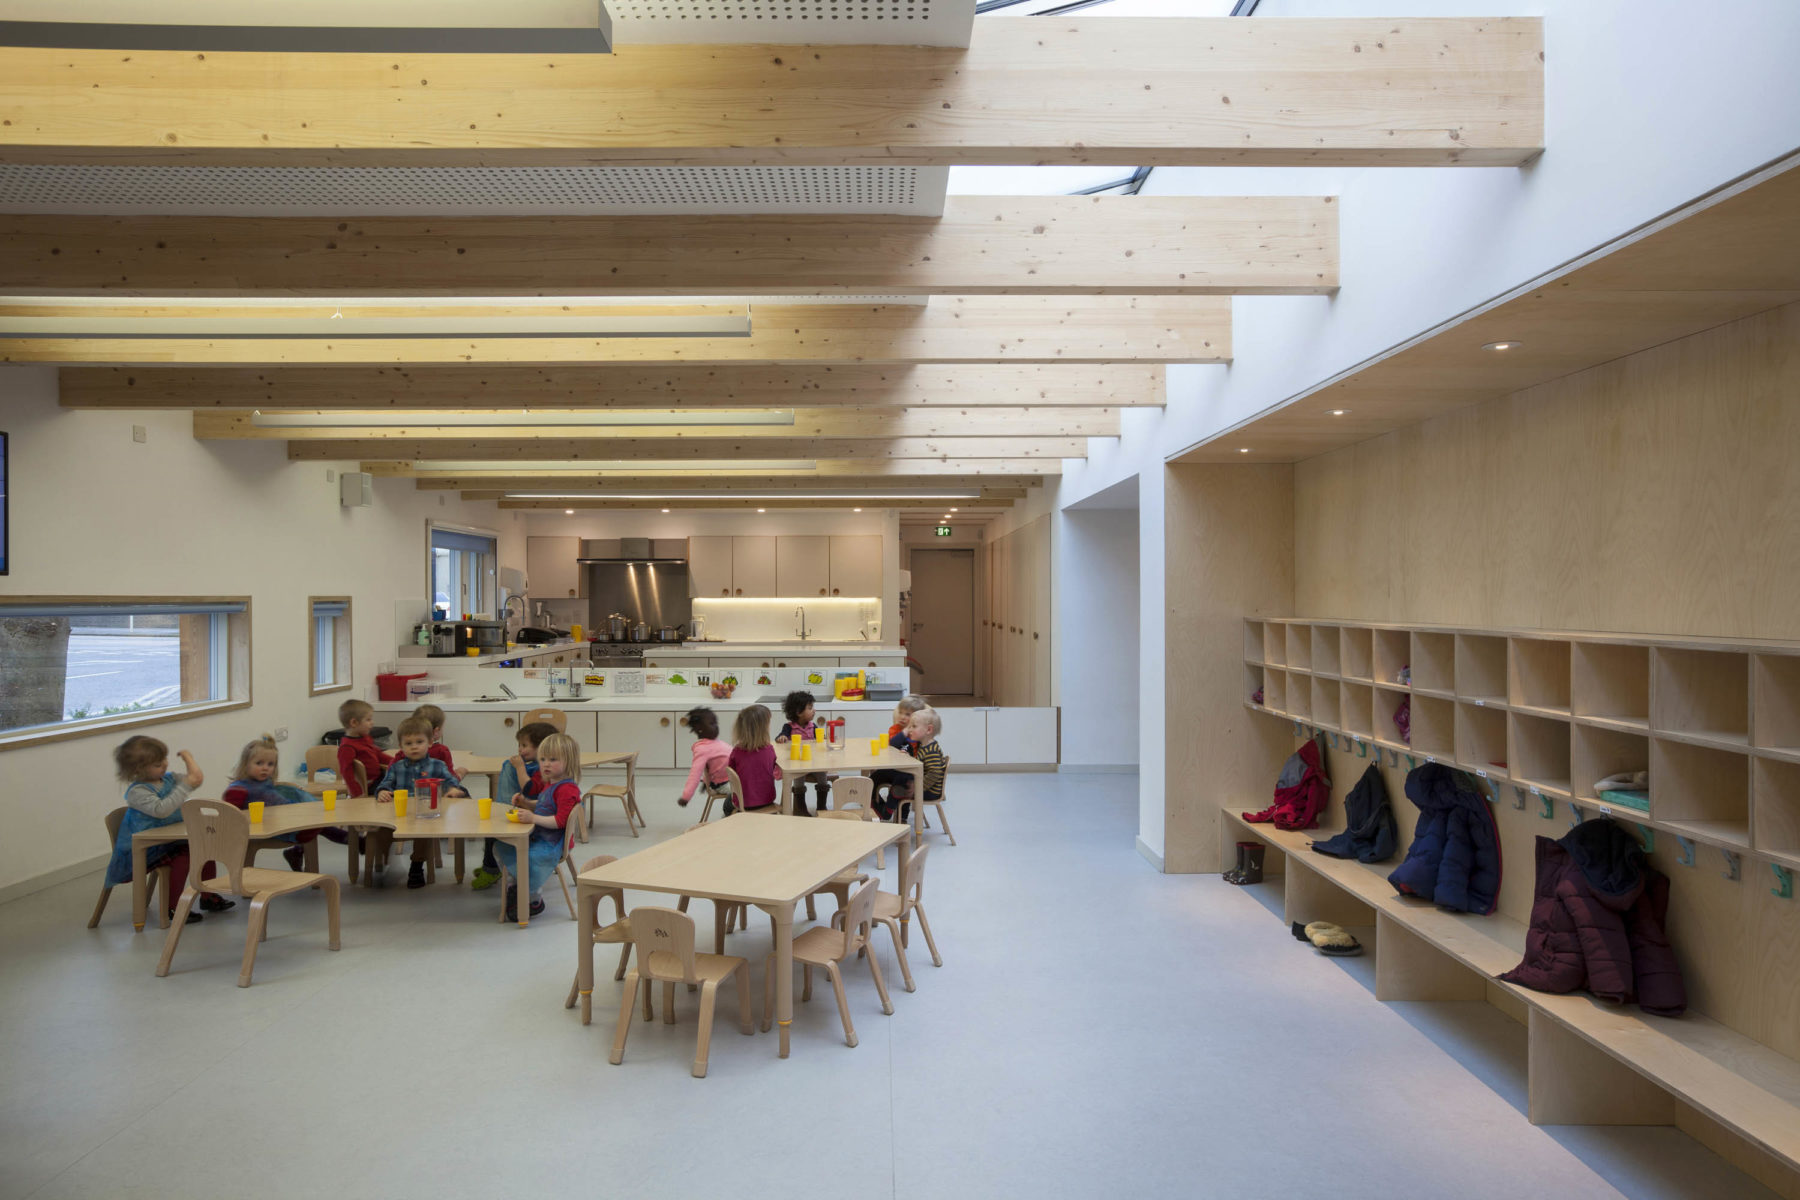 Arcadia Nursery, University of Edinburgh. Interior view showing timber beams, shelving. Children seated at tables.Malcolm Fraser Architects Arcadia Nursery Photograph by Angus Bremner